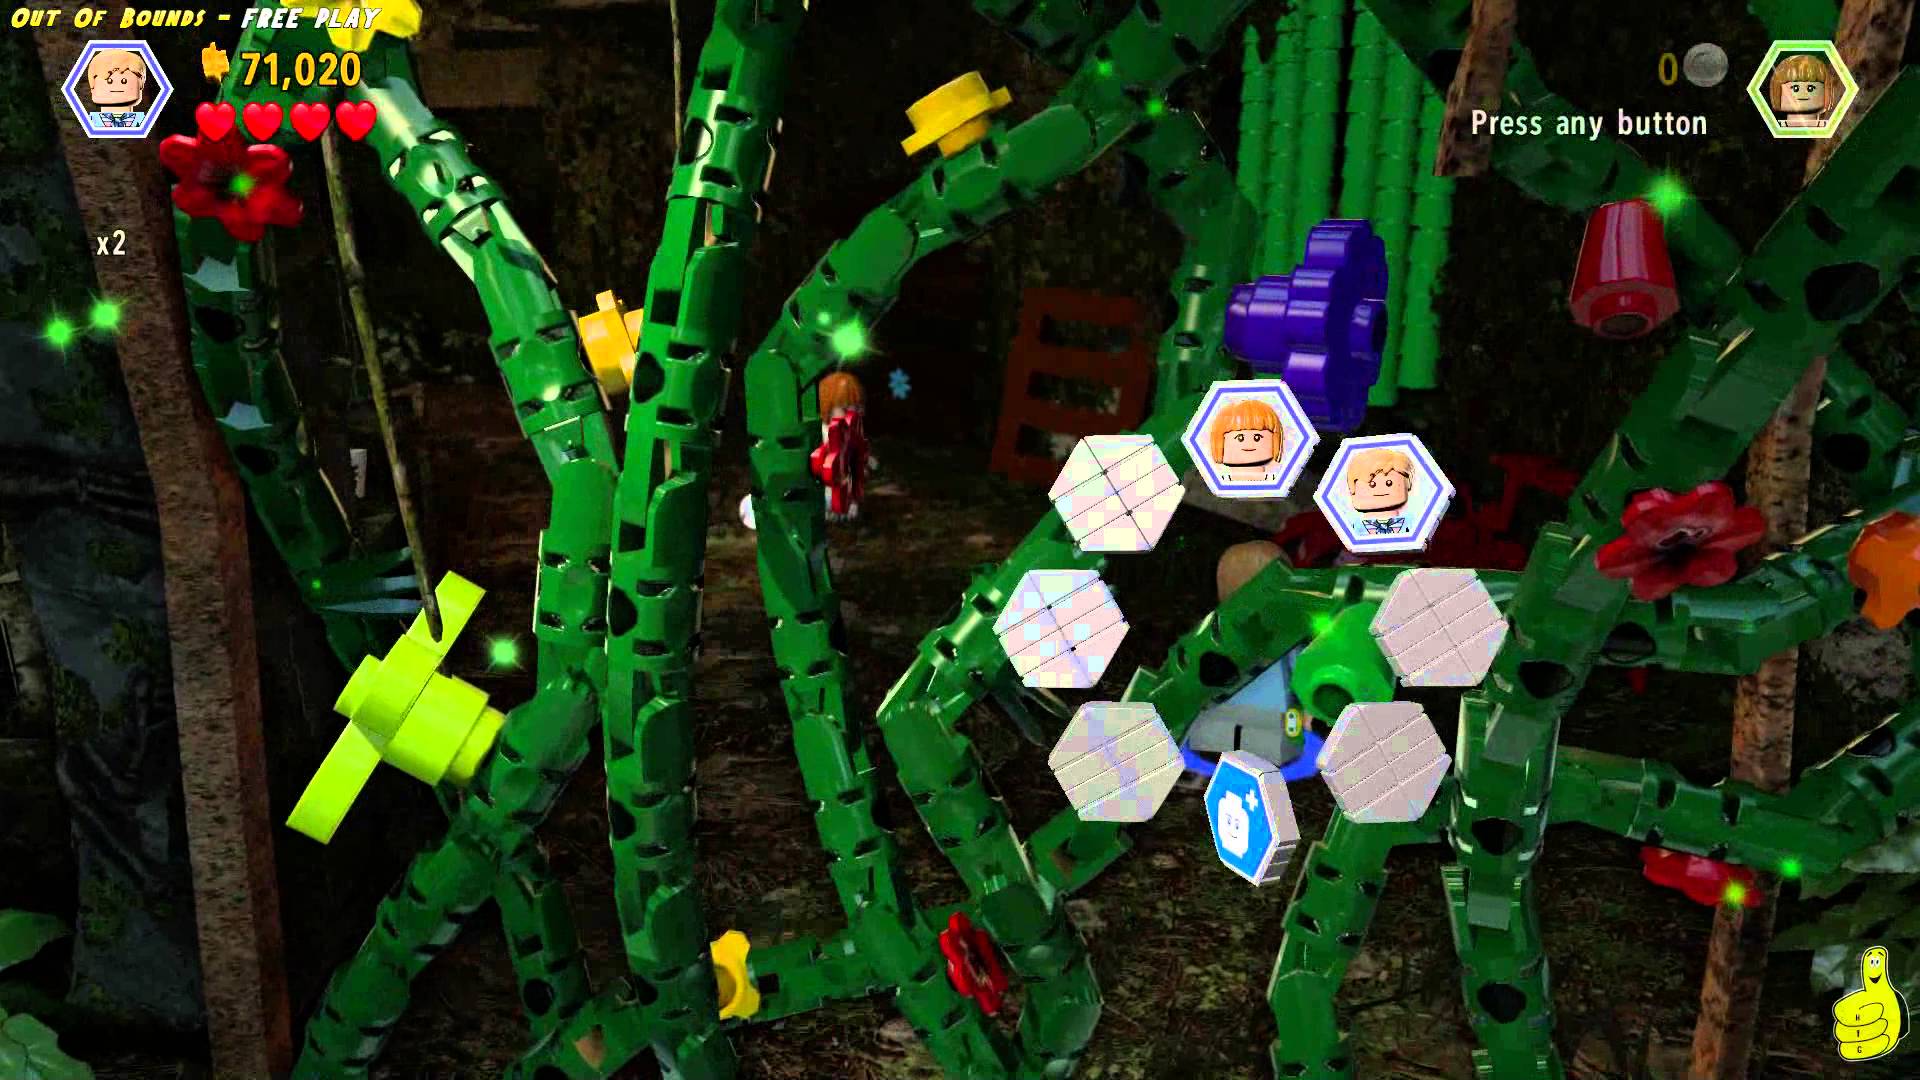 Lego Jurassic World: Level 18 Out Of Bounds FREE PLAY (All Collectibles) – HTG